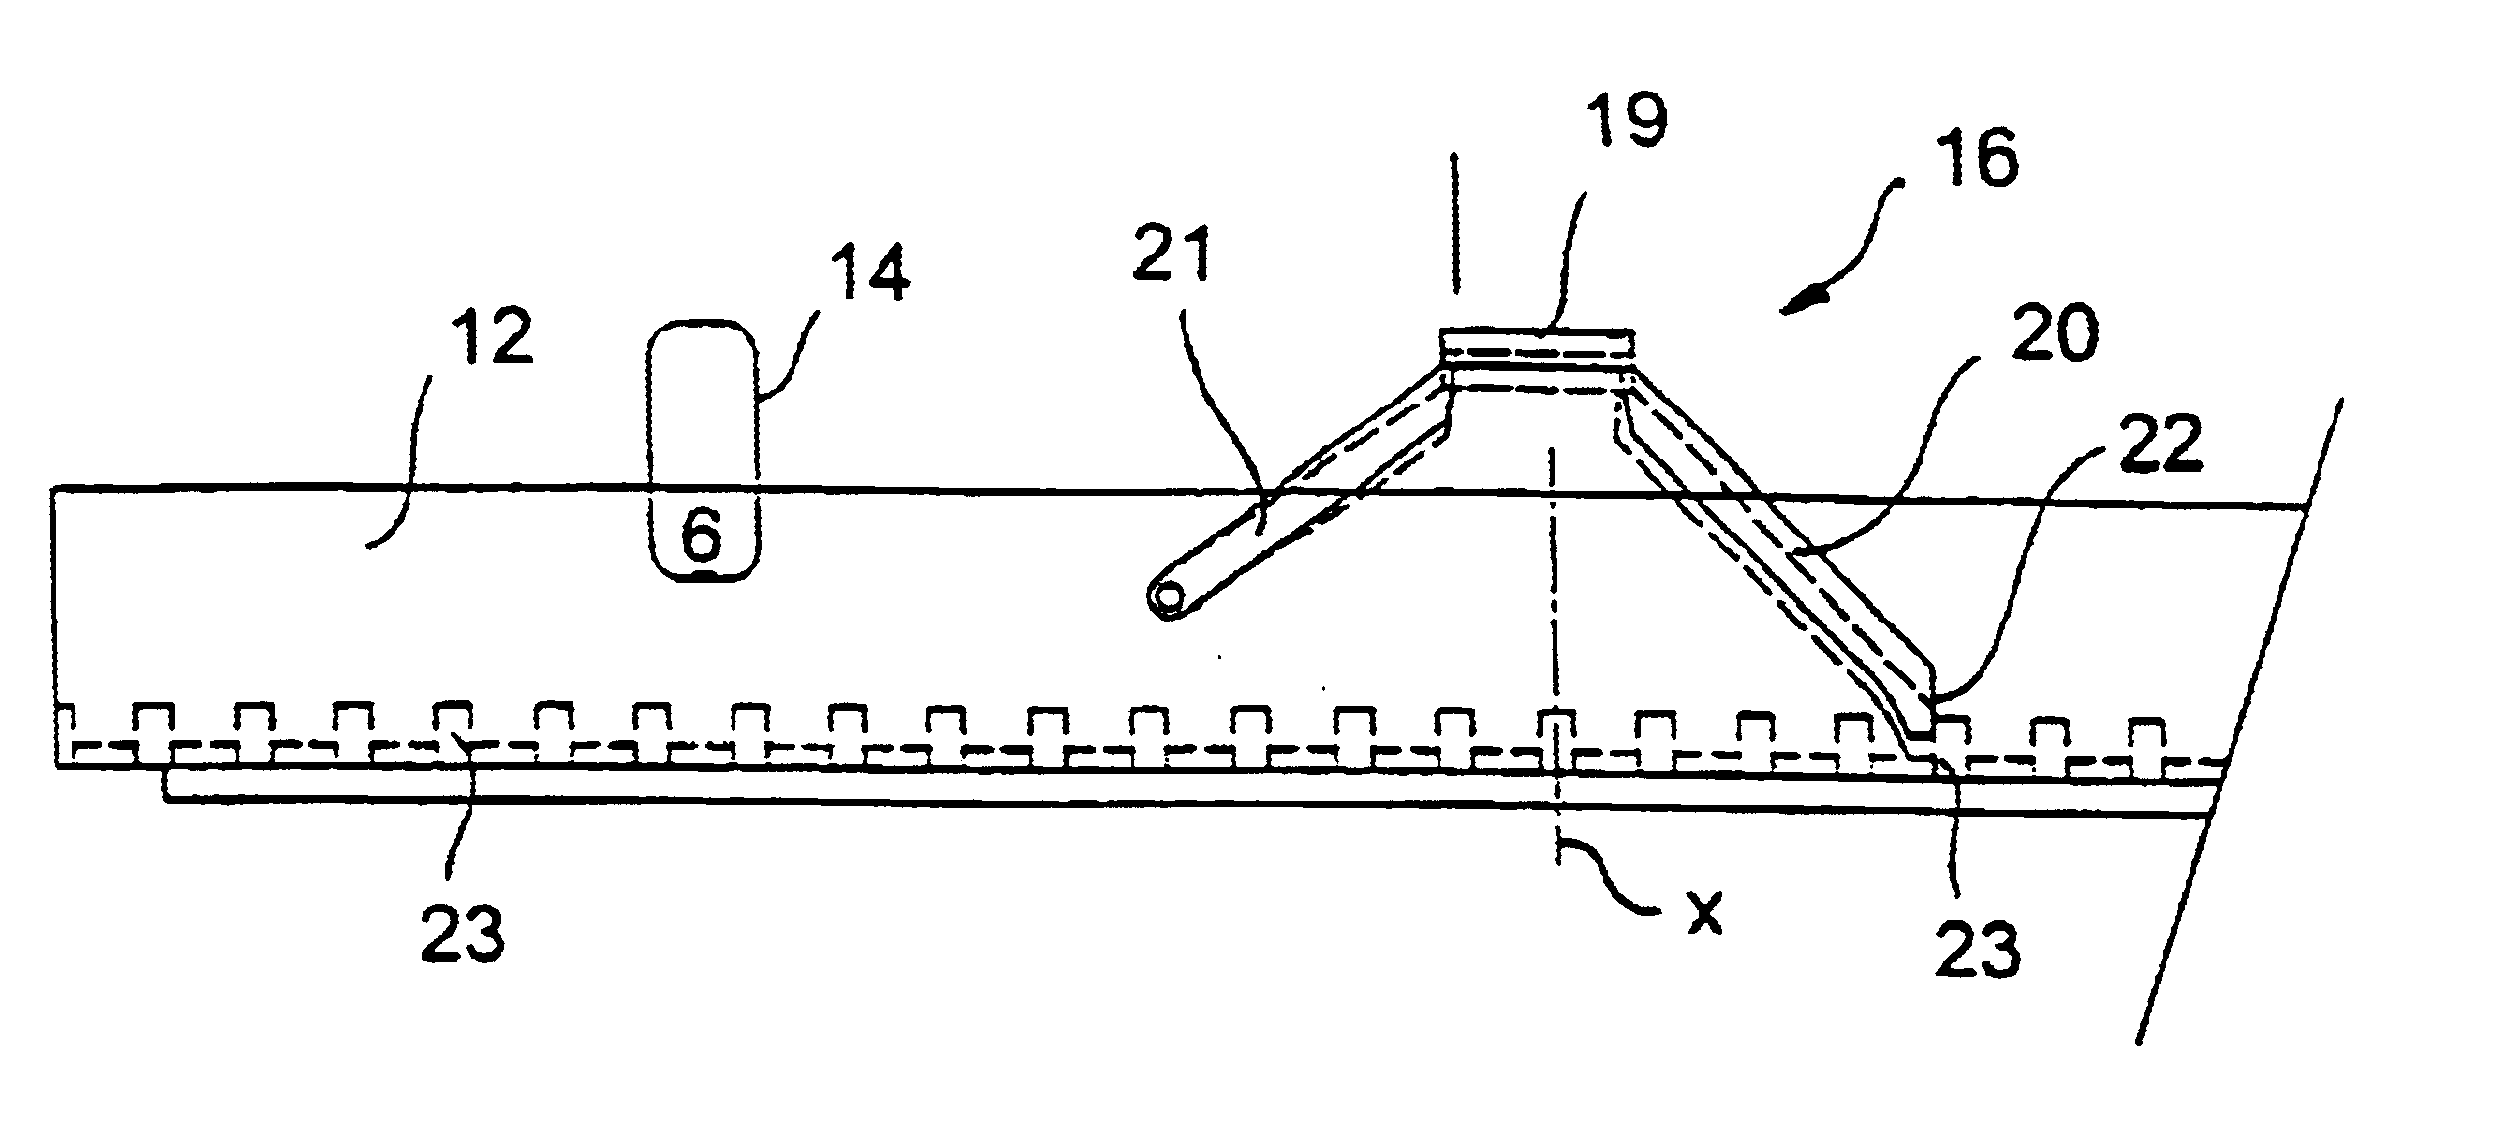 Inhalator comprising a dosage counting device